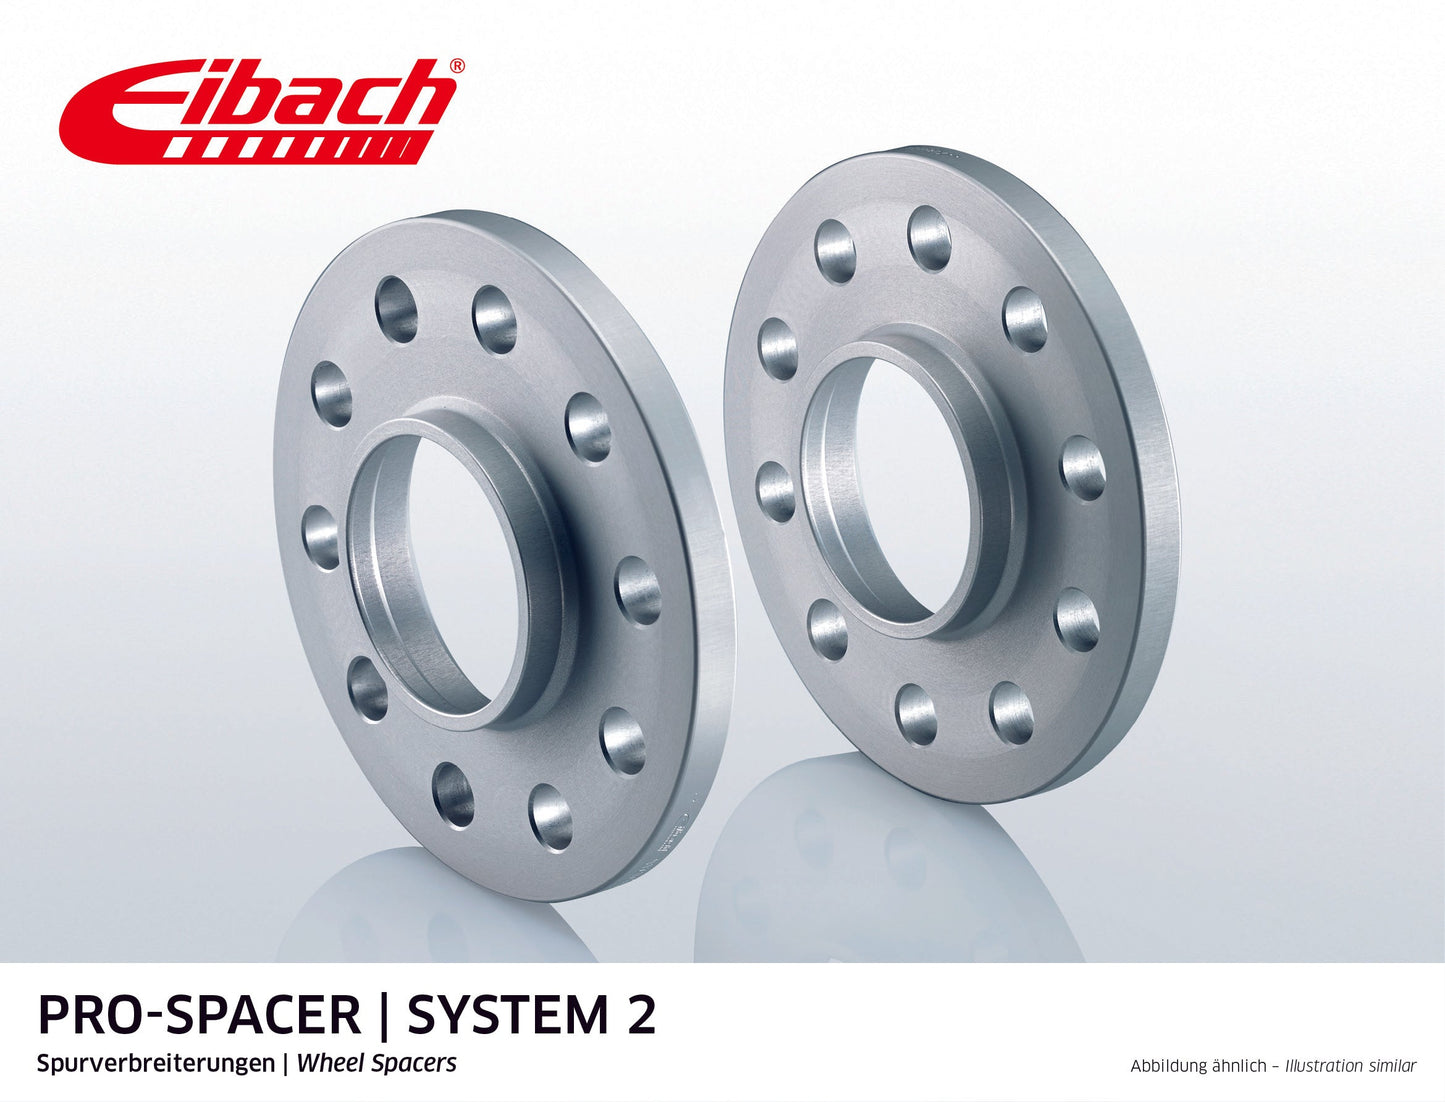 Eibach Pro-Spacer Kit (Pair Of Spacers) 15mm Per Spacer (System 2) S90-2-15-003 (Silver) at £118.84